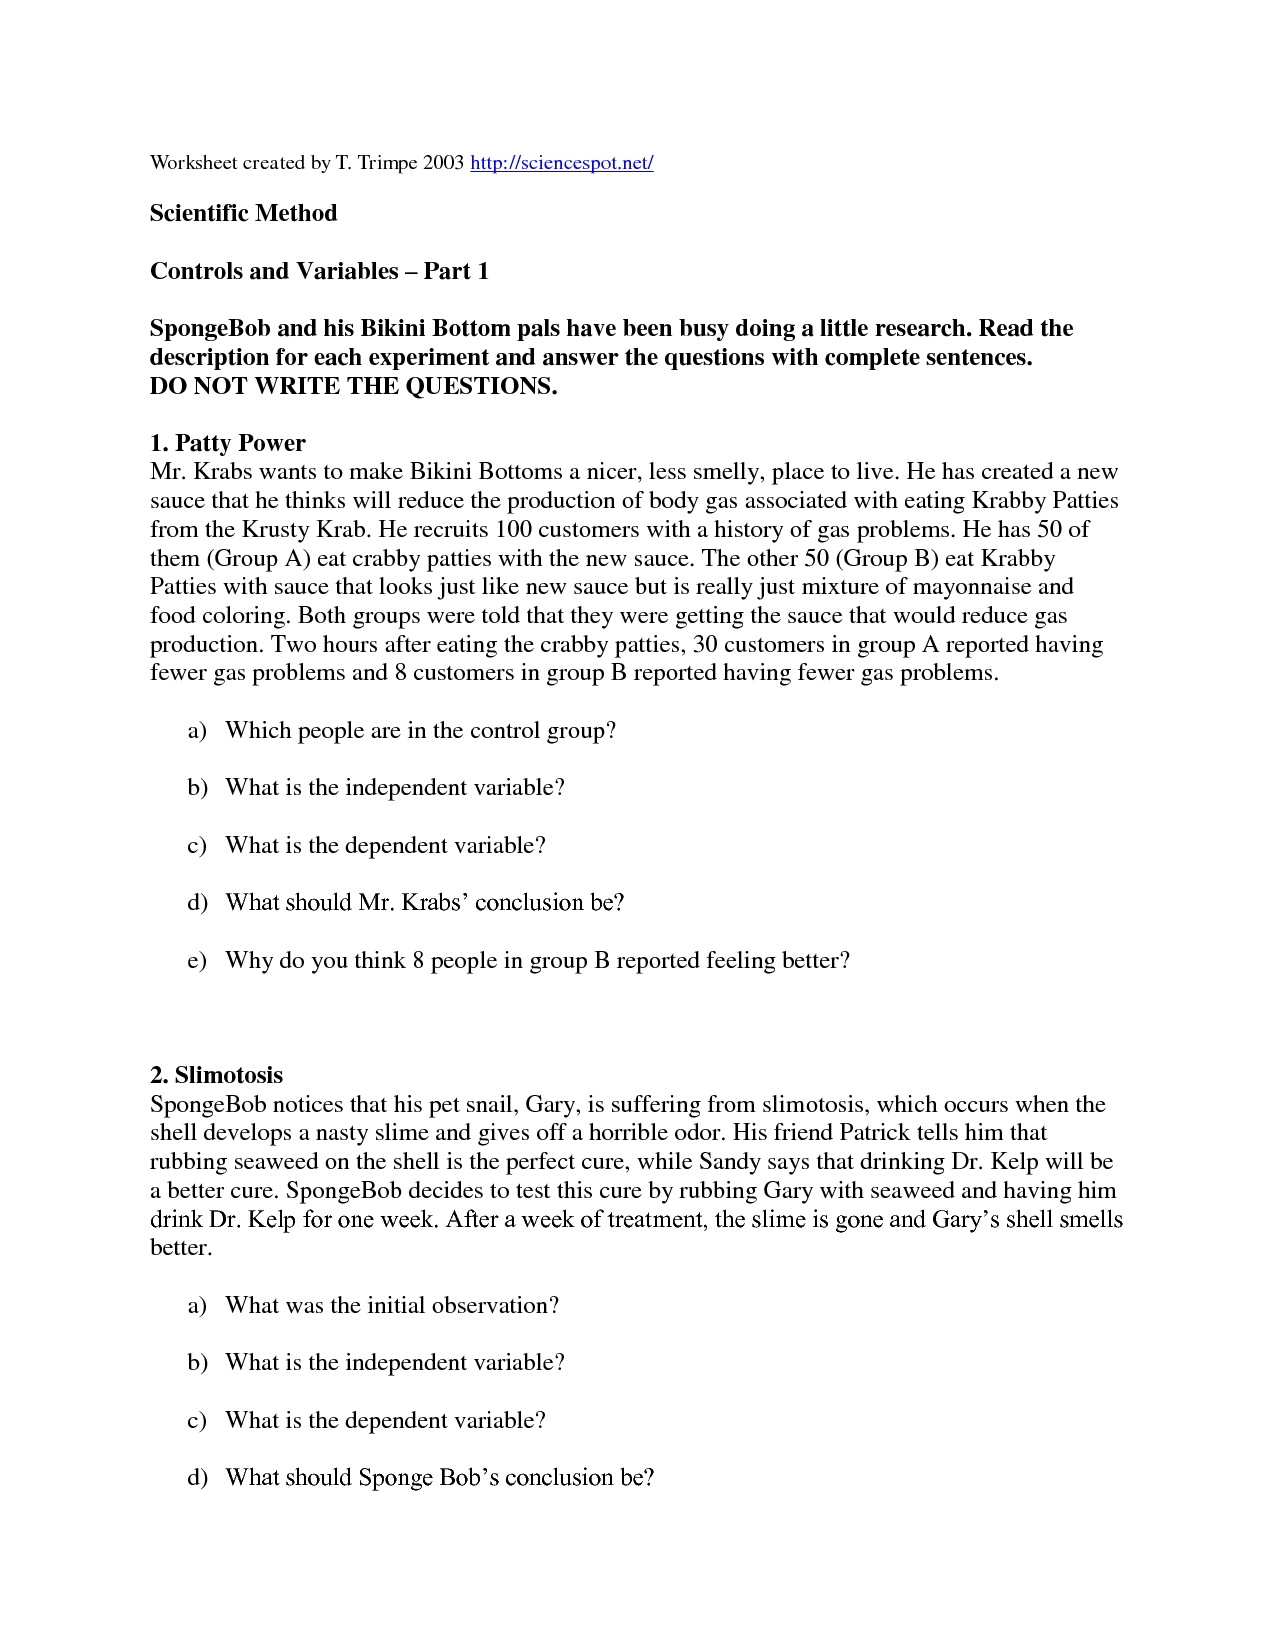 16-best-images-of-simpson-science-variable-worksheet-answer-controls-and-variables-science